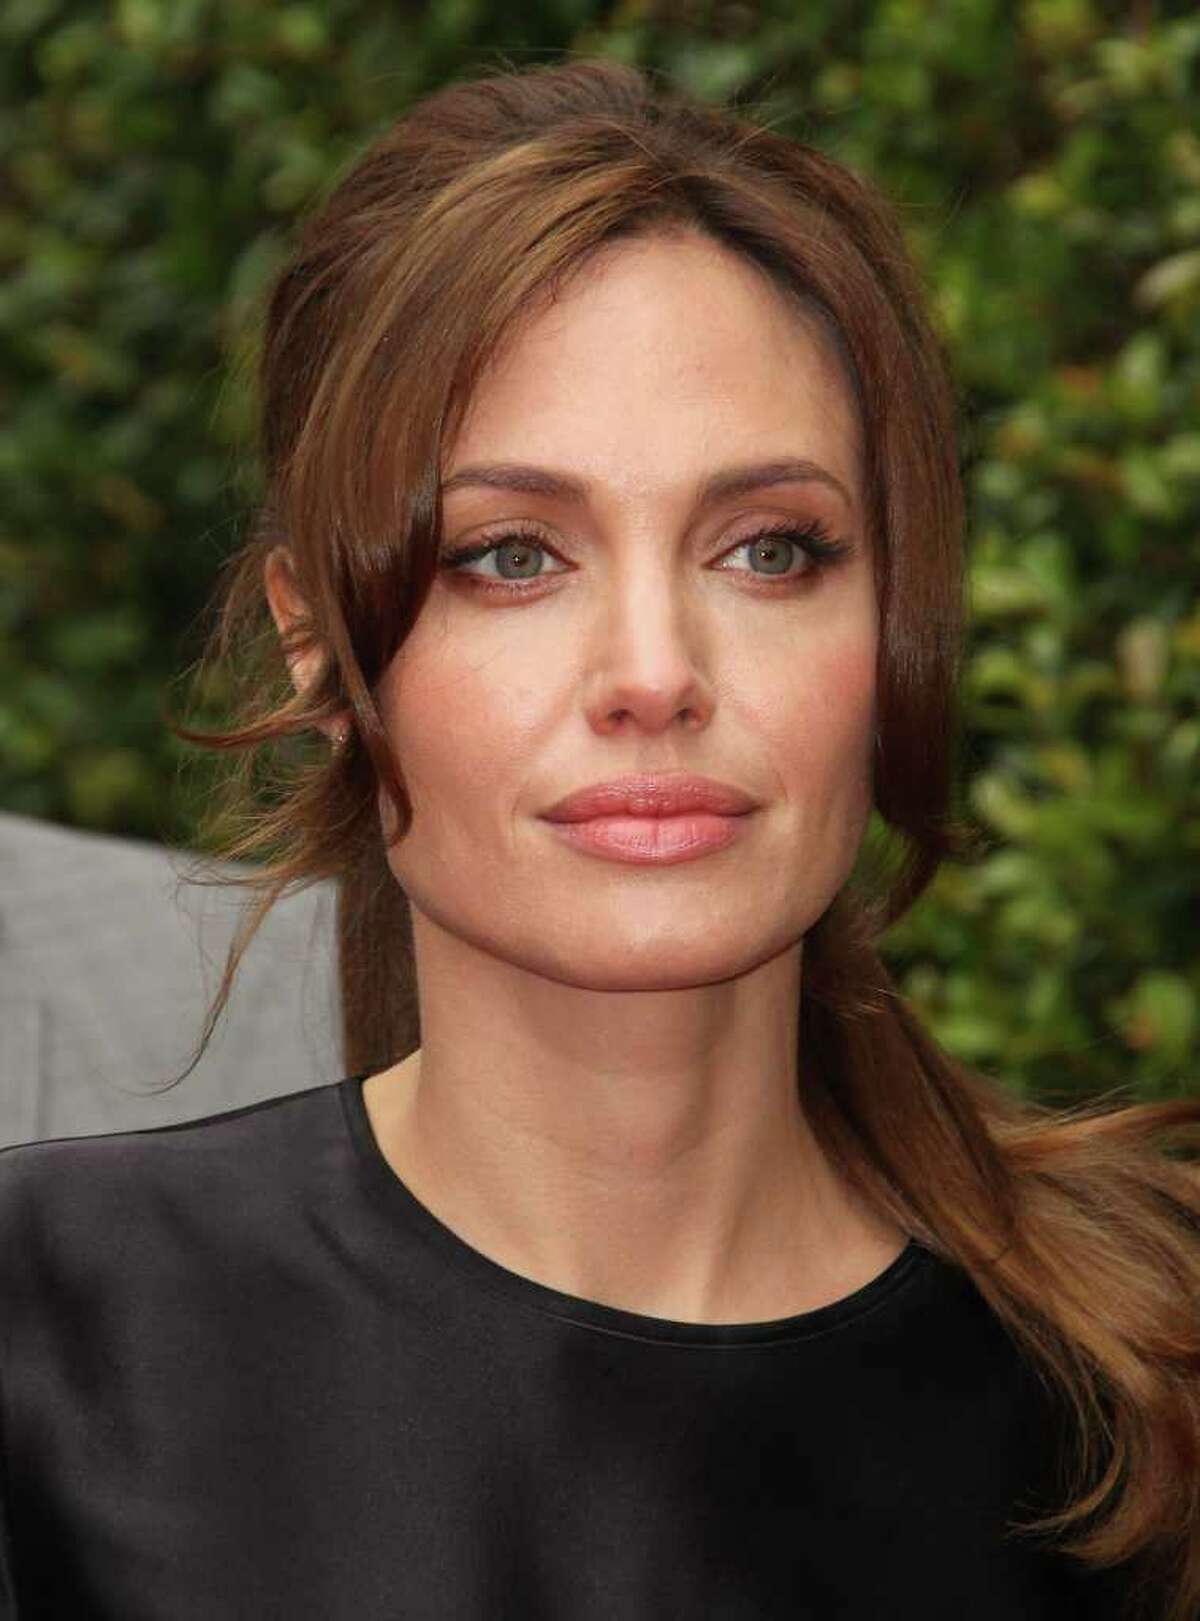 Actress Angelina Jolie attends the Premiere of DreamWorks Animation's "Kung Fu Panda 2" at Mann's Chinese Theatre in Hollywood, California.